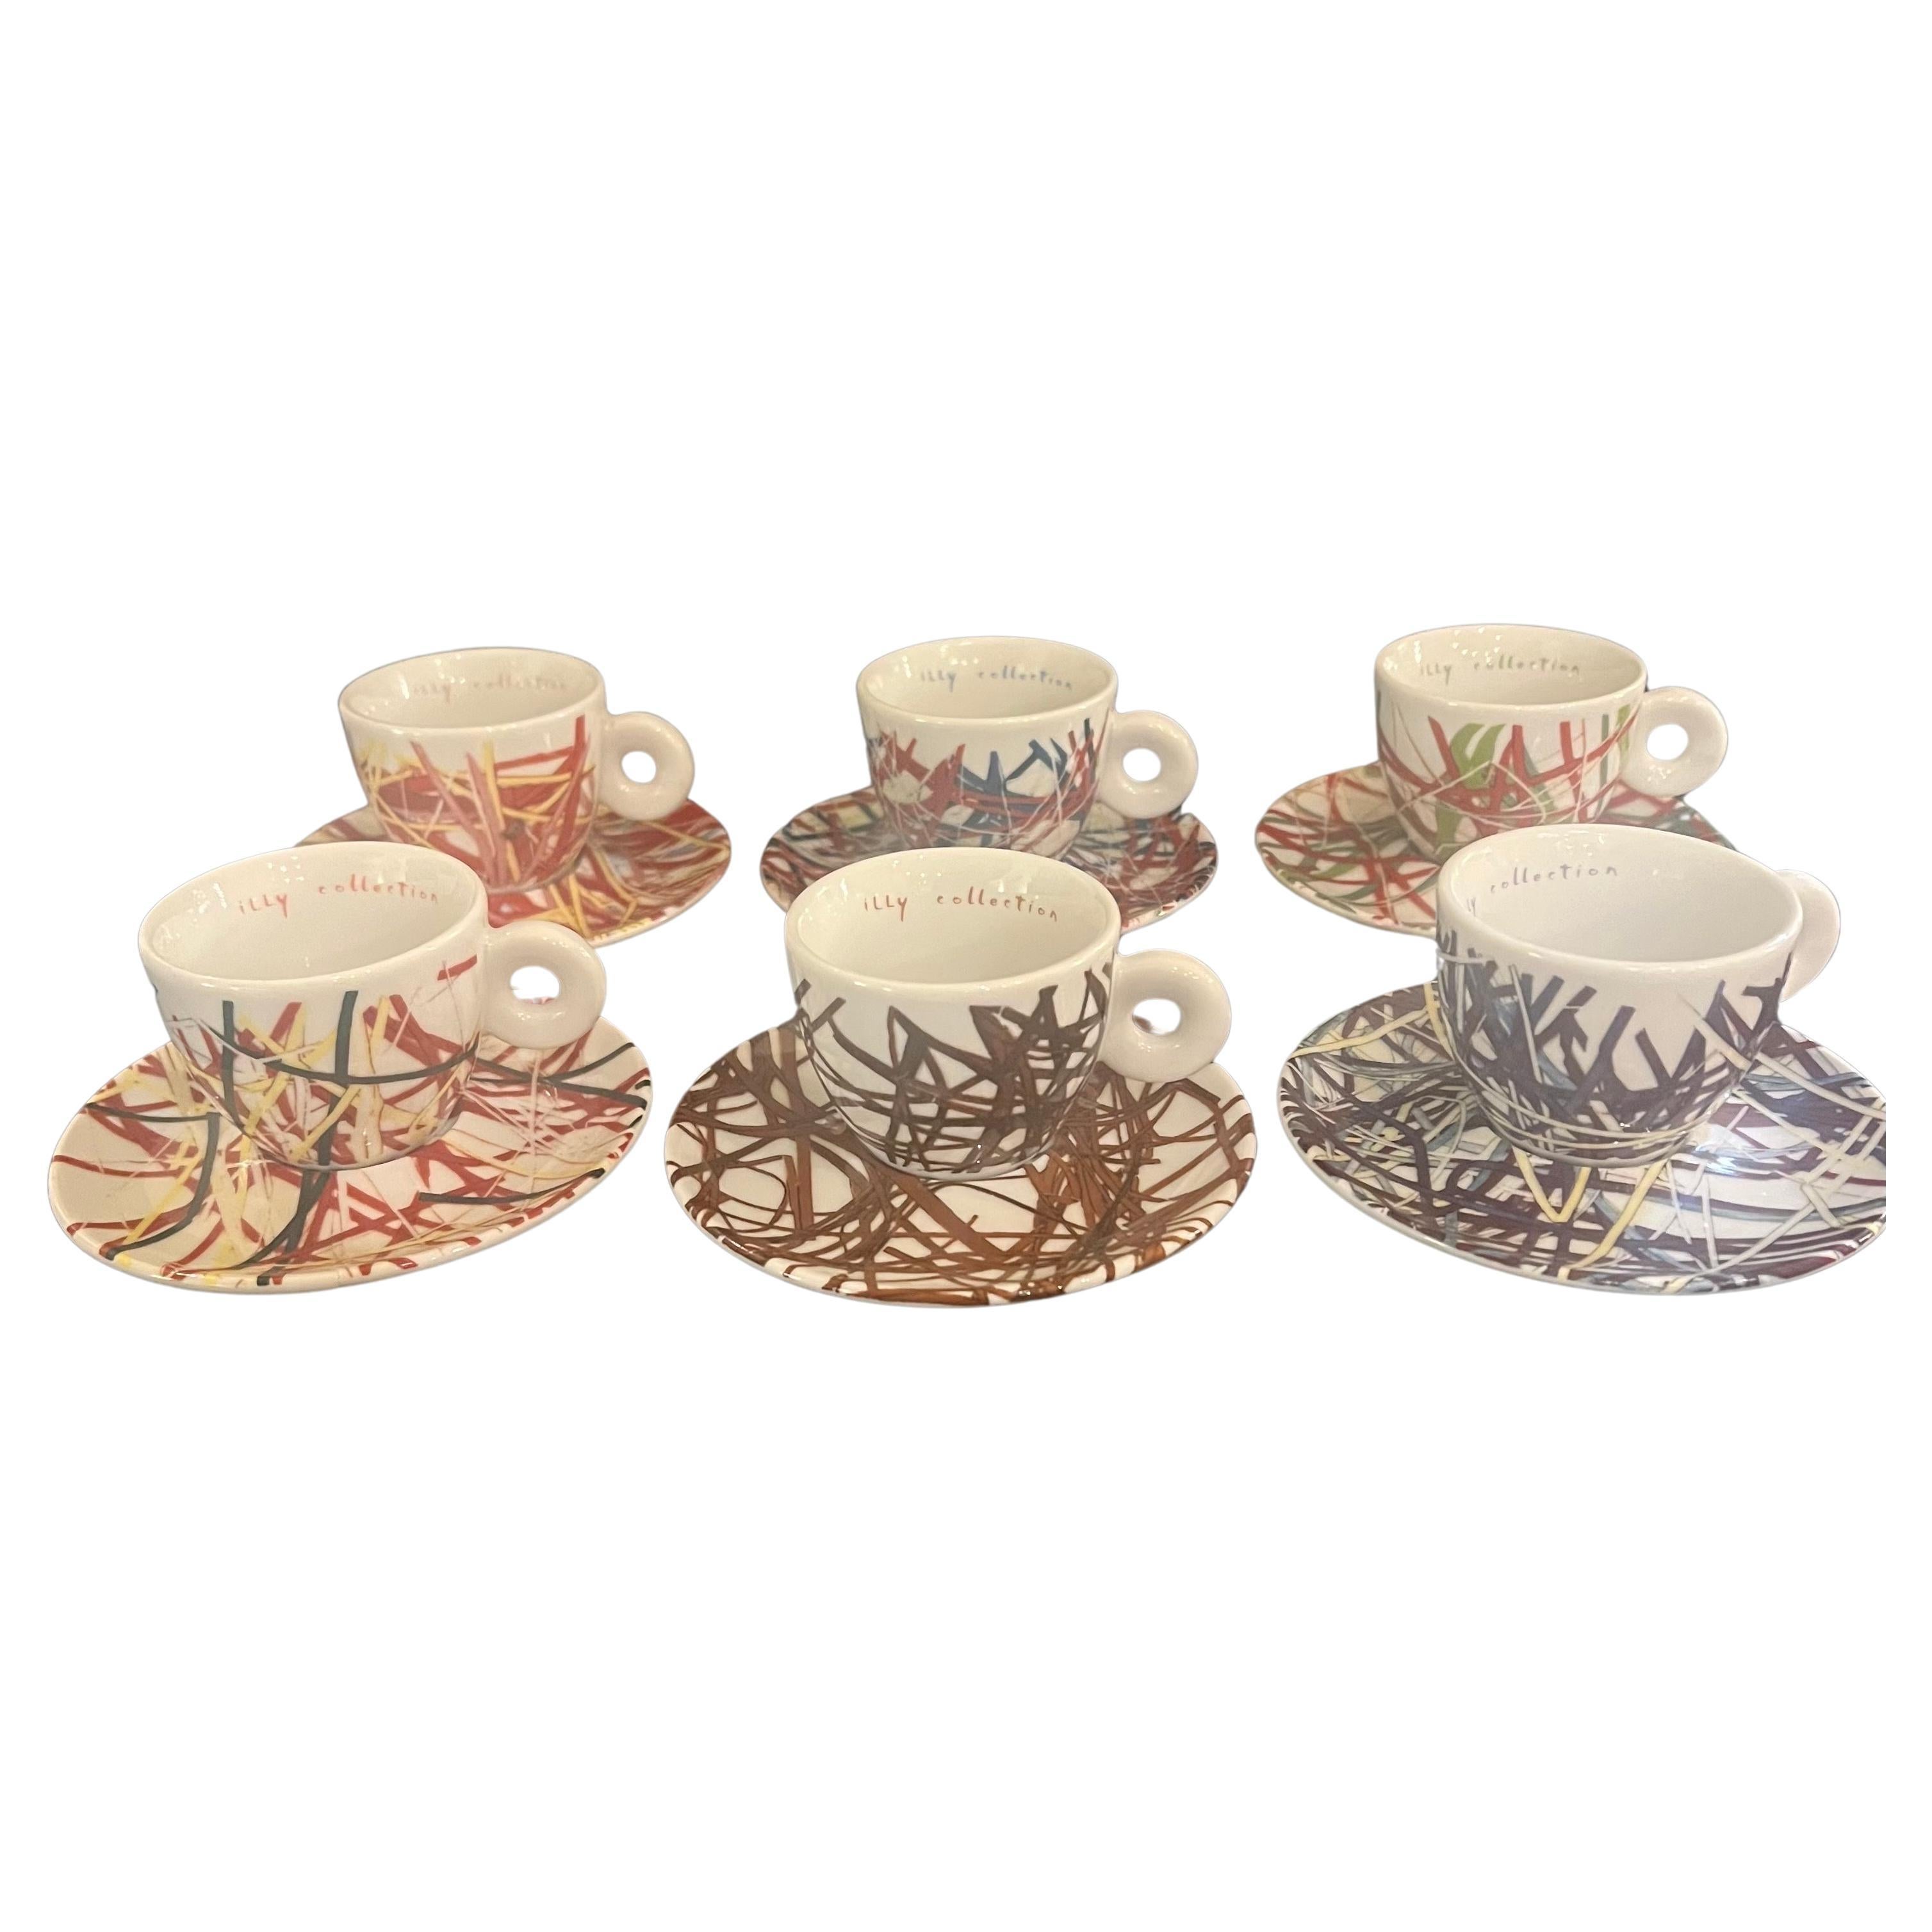 Set of 6 Espresso Cups & Saucers Special Edition Numbered & Dated by Mitterteich